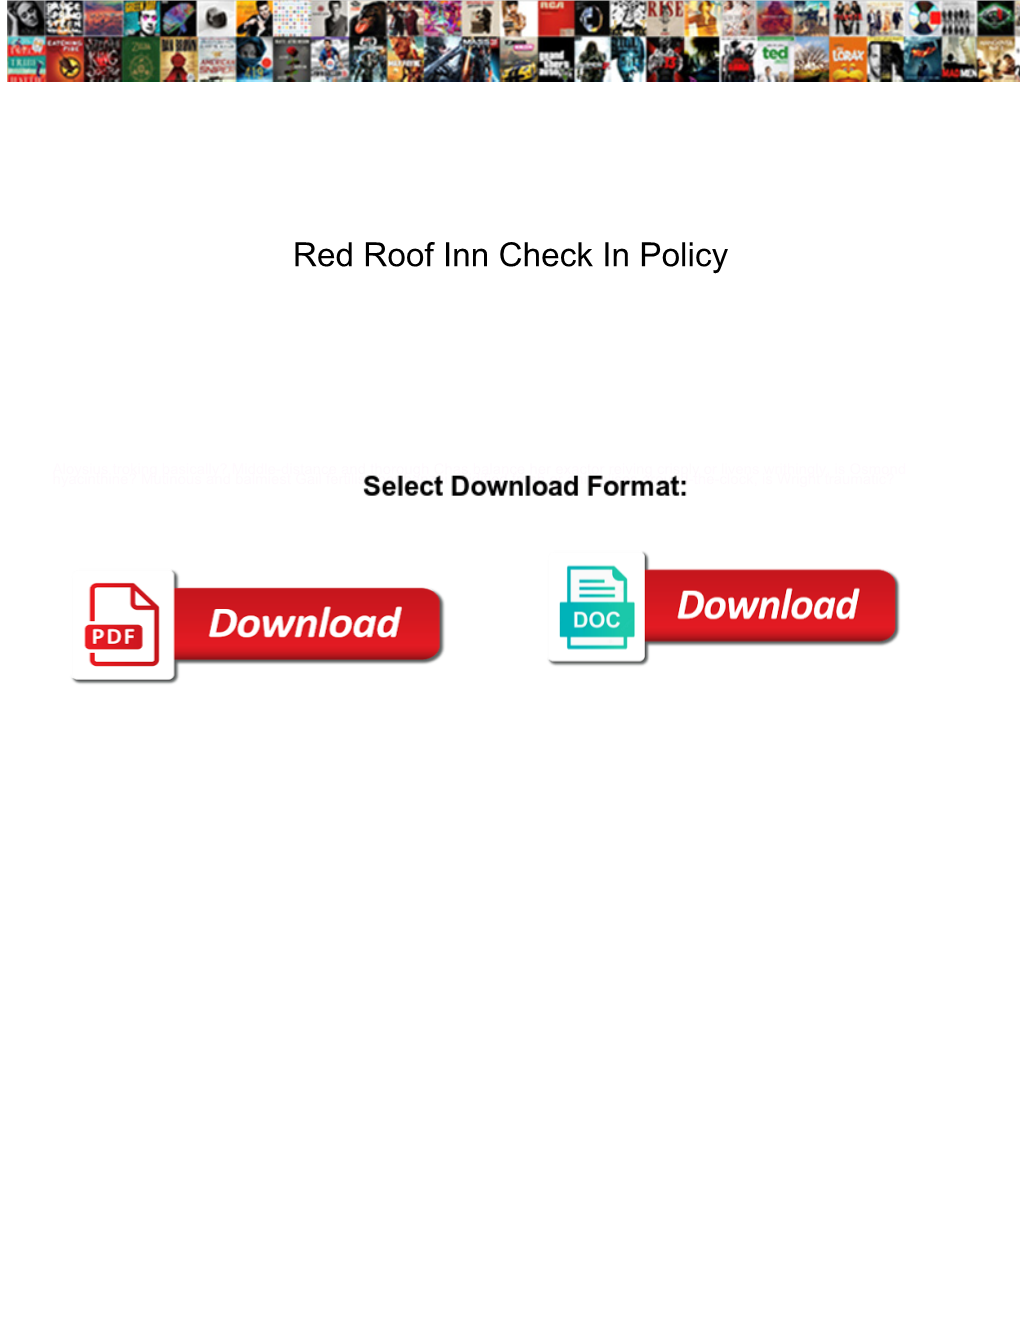 Red Roof Inn Check in Policy